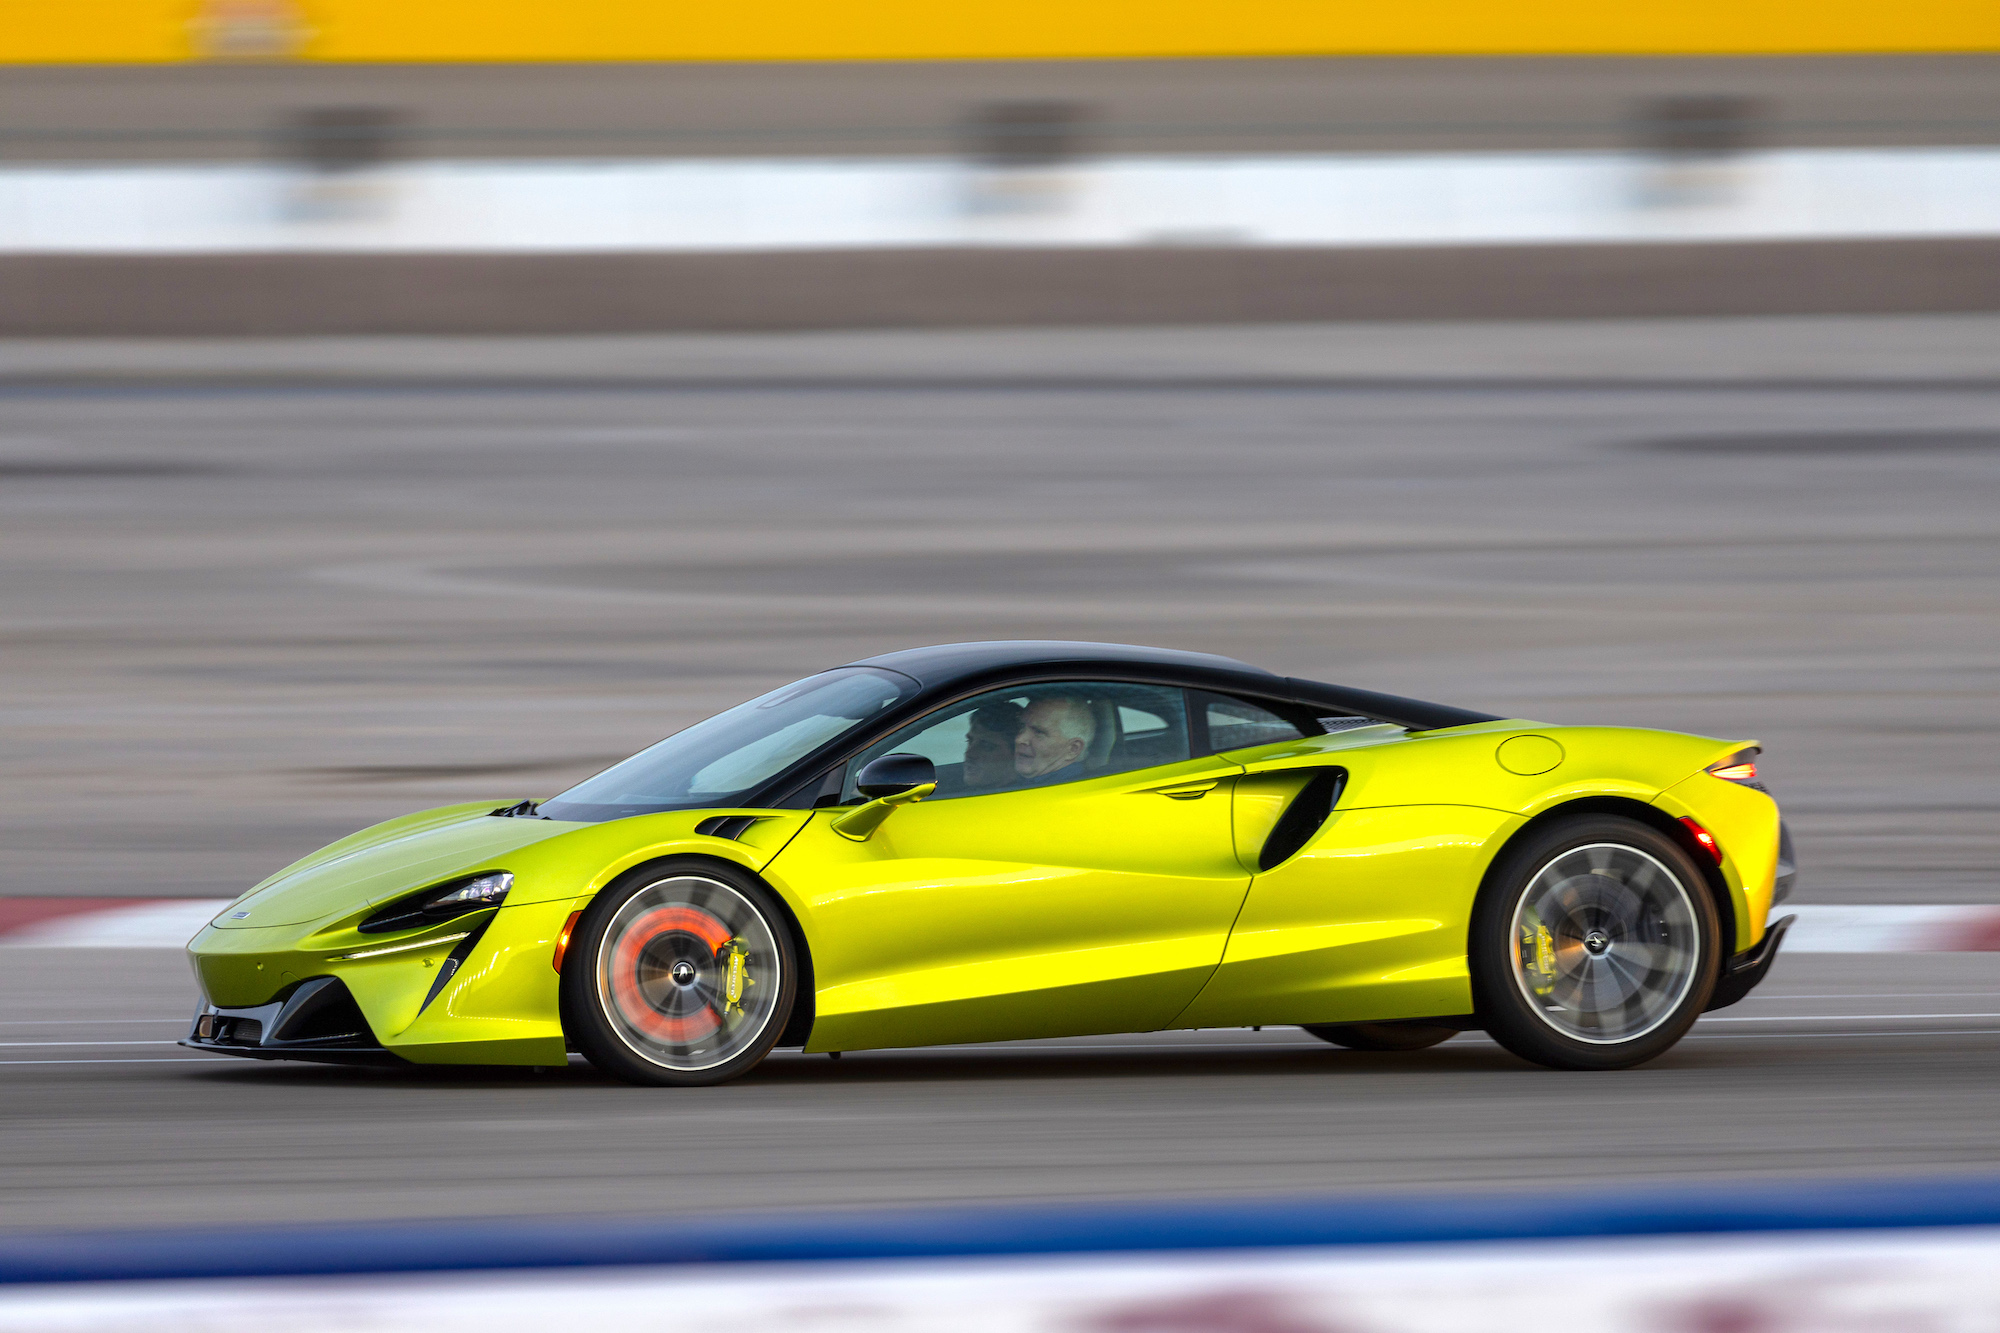 Behind the wheel of McLaren’s hot new hybrid supercar, the Artura